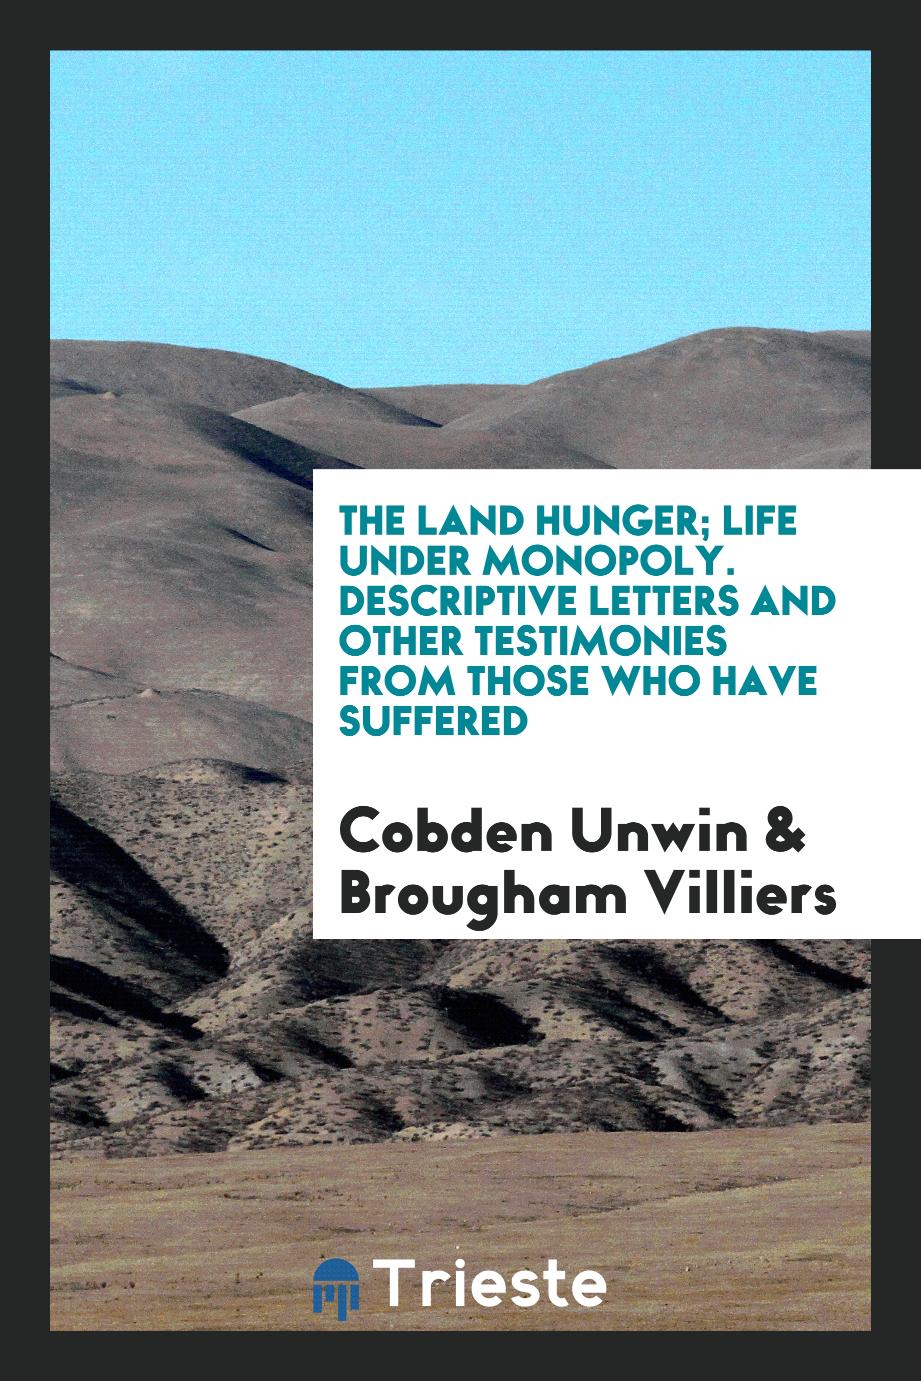 The land hunger; life under monopoly. Descriptive letters and other testimonies from those who have suffered